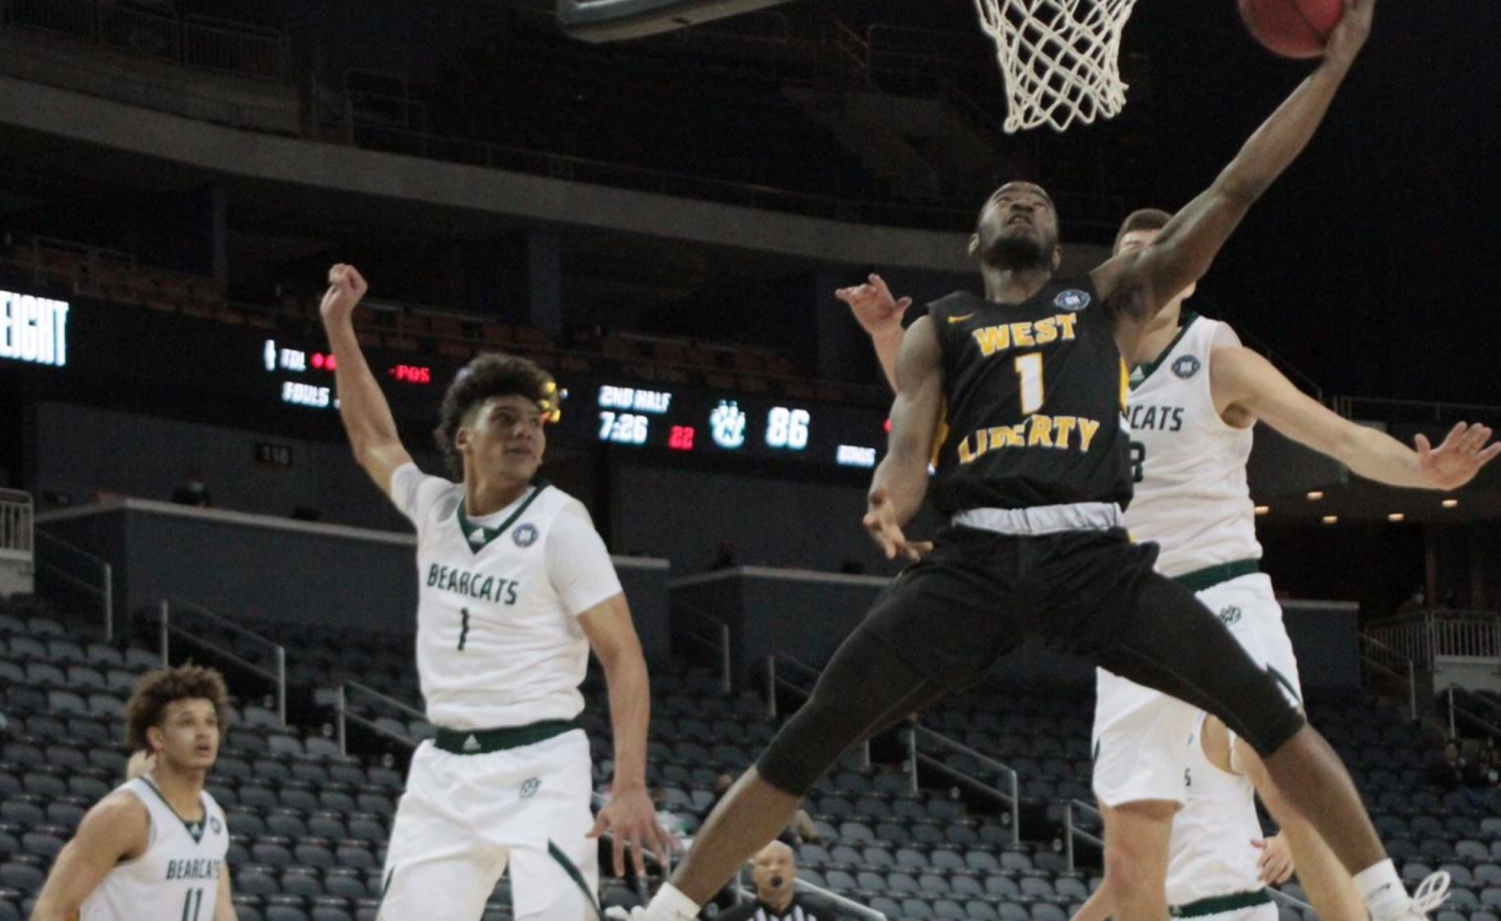 Northwest Missouri State University beats Hilltoppers in NCAA Division